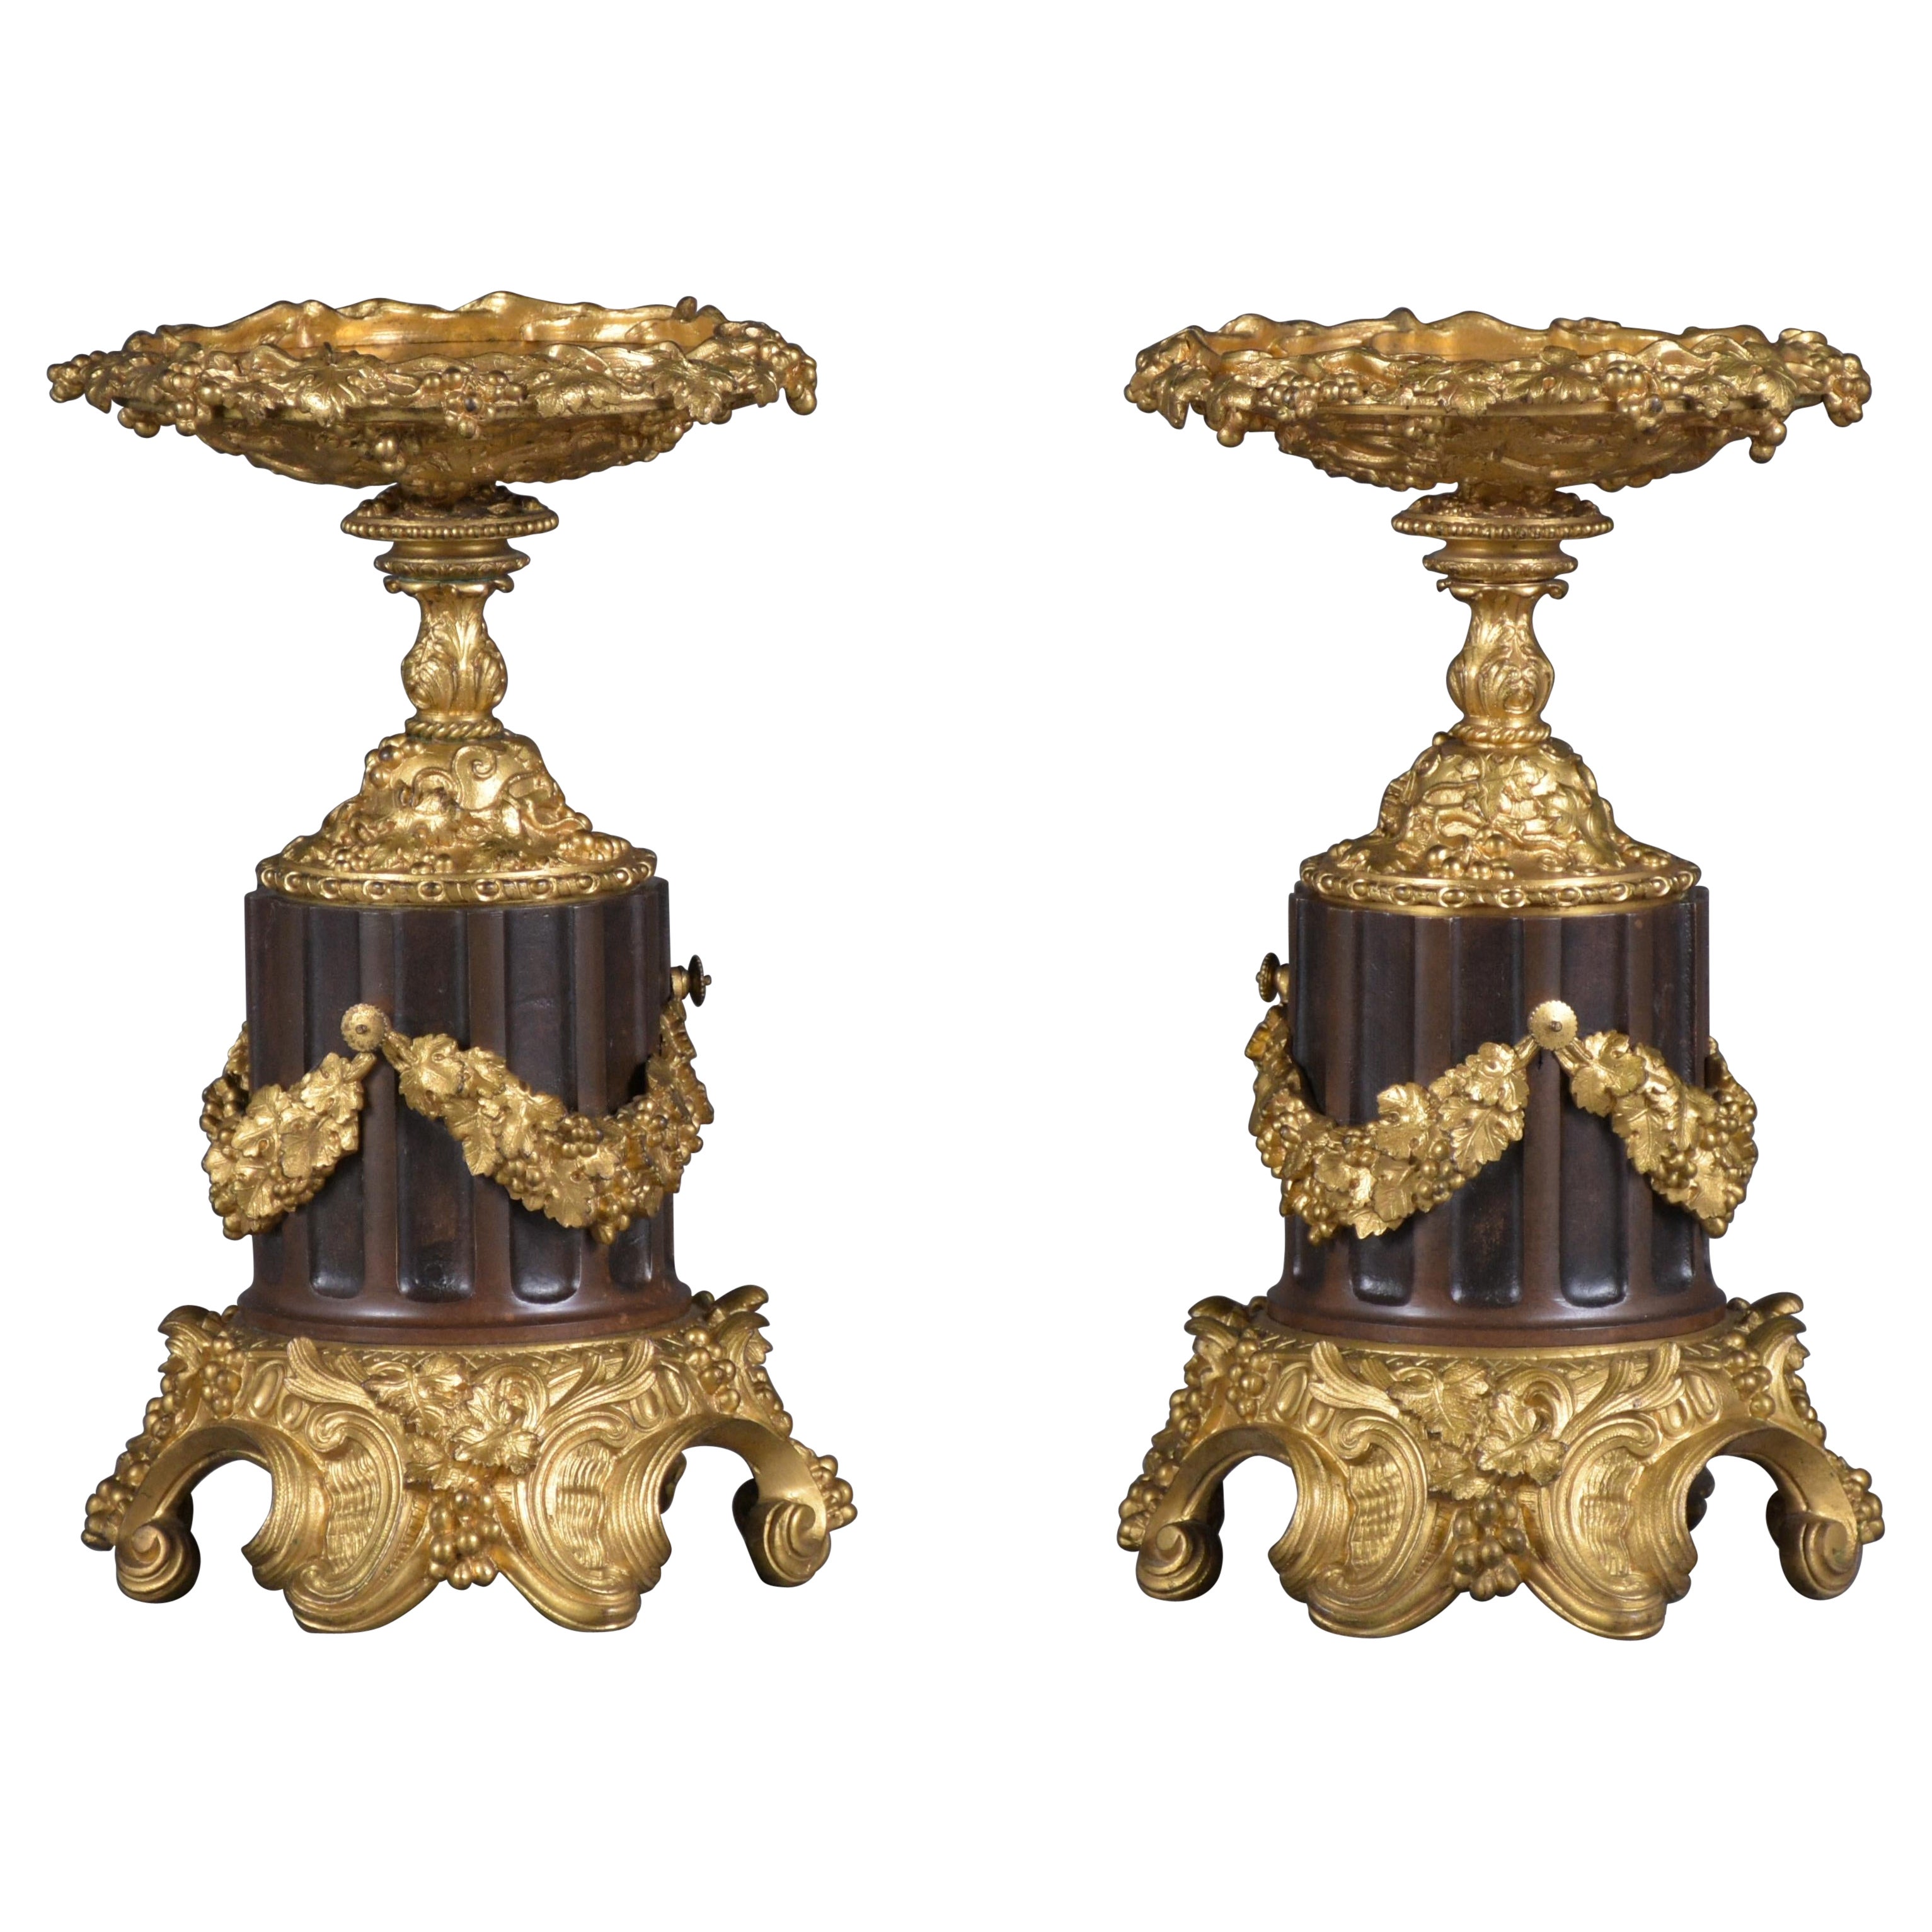 Elegant 19th-Century French Bronzed Urns with Gold Ormolu Details